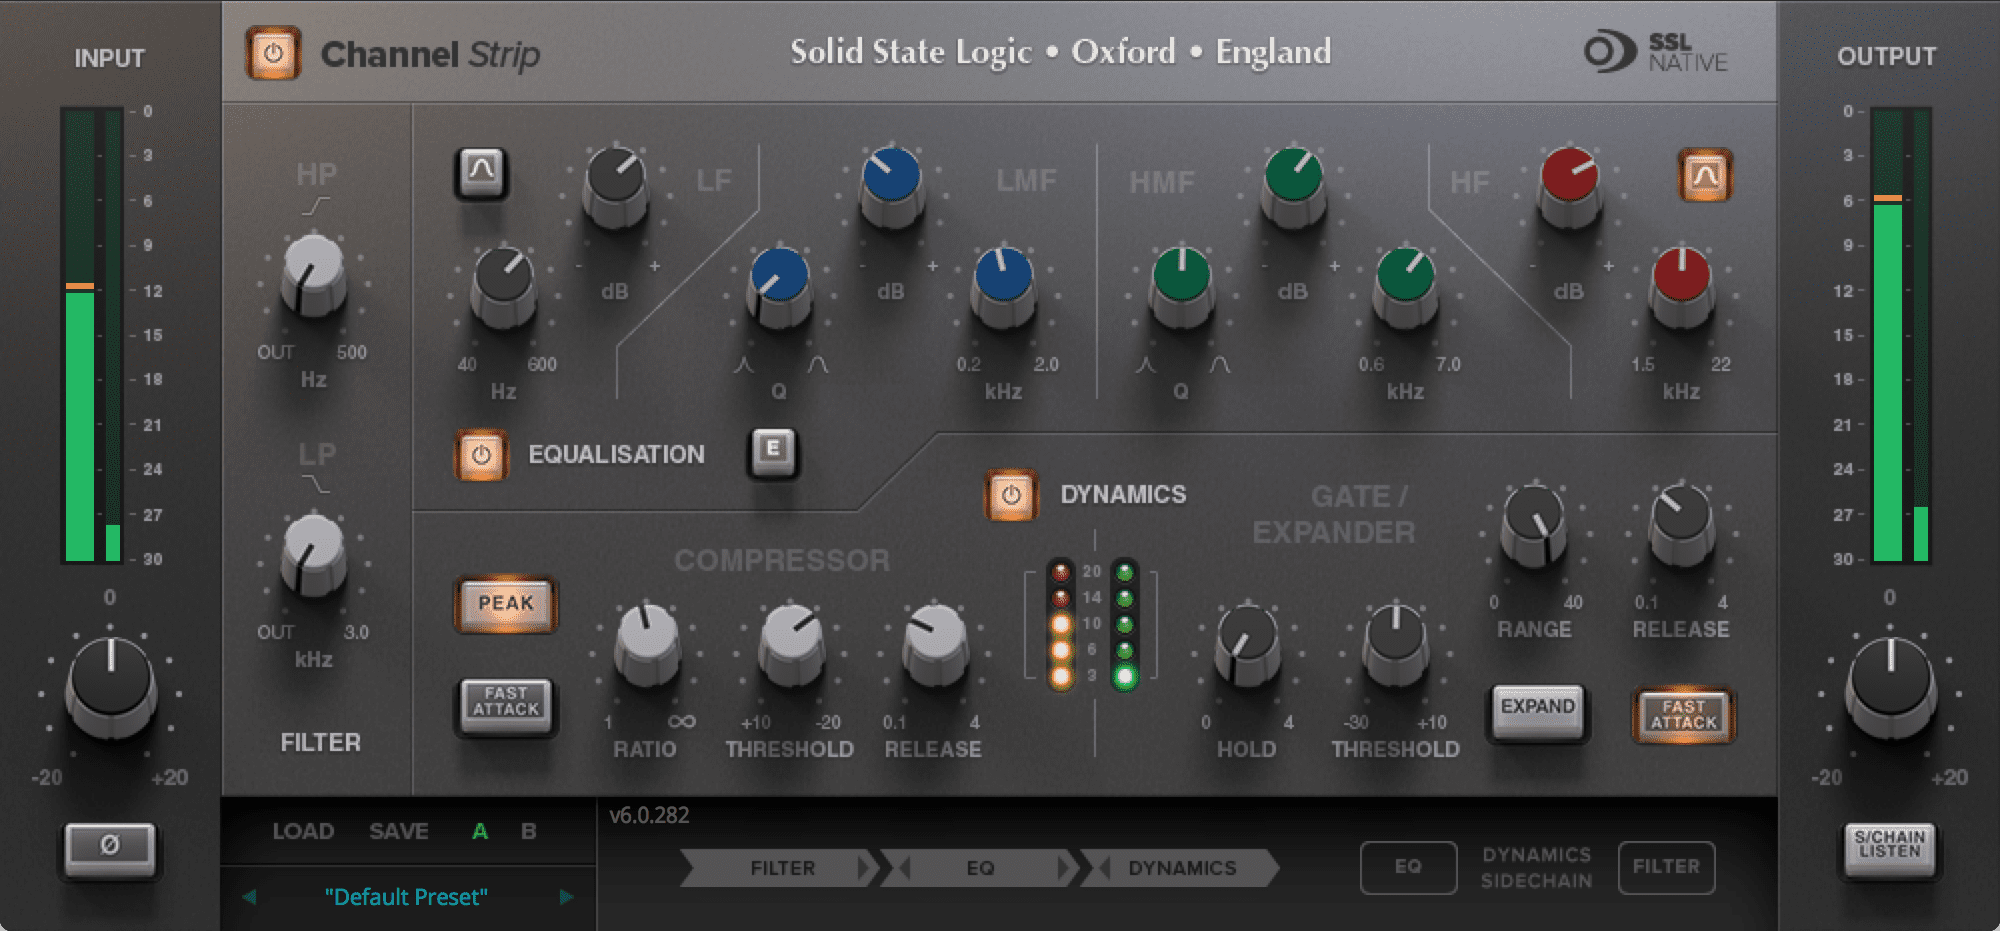 slate vcc and ssl duende together